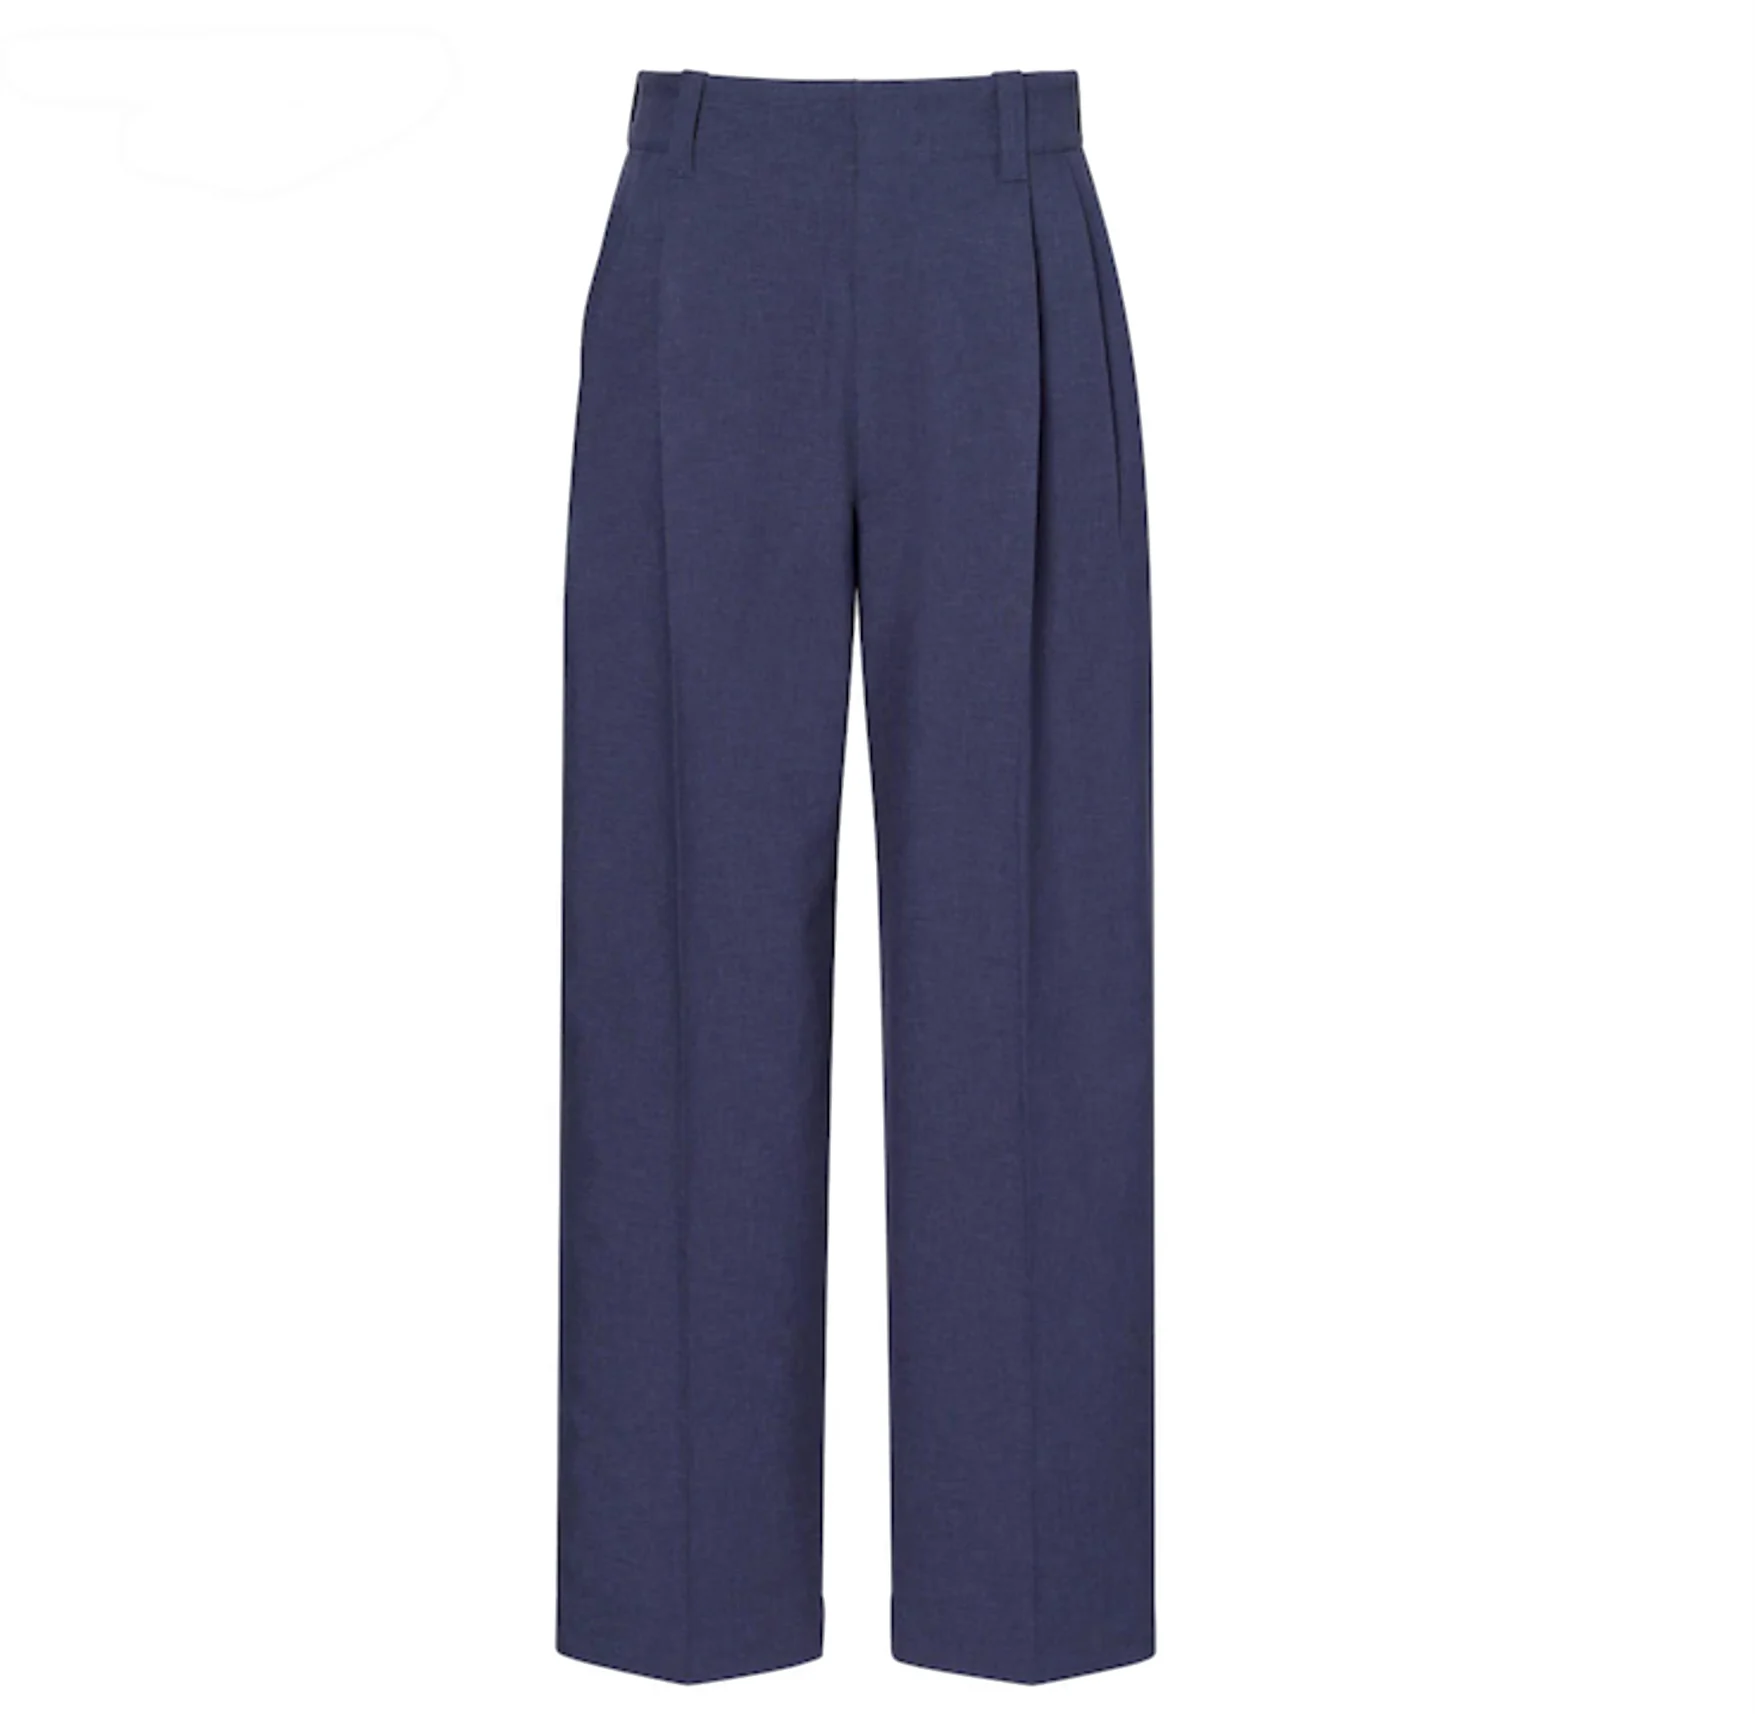 Uniqlo x MARNI Wide Fit Tuck Pants (Asia Sizing) Blue Men's - SS22